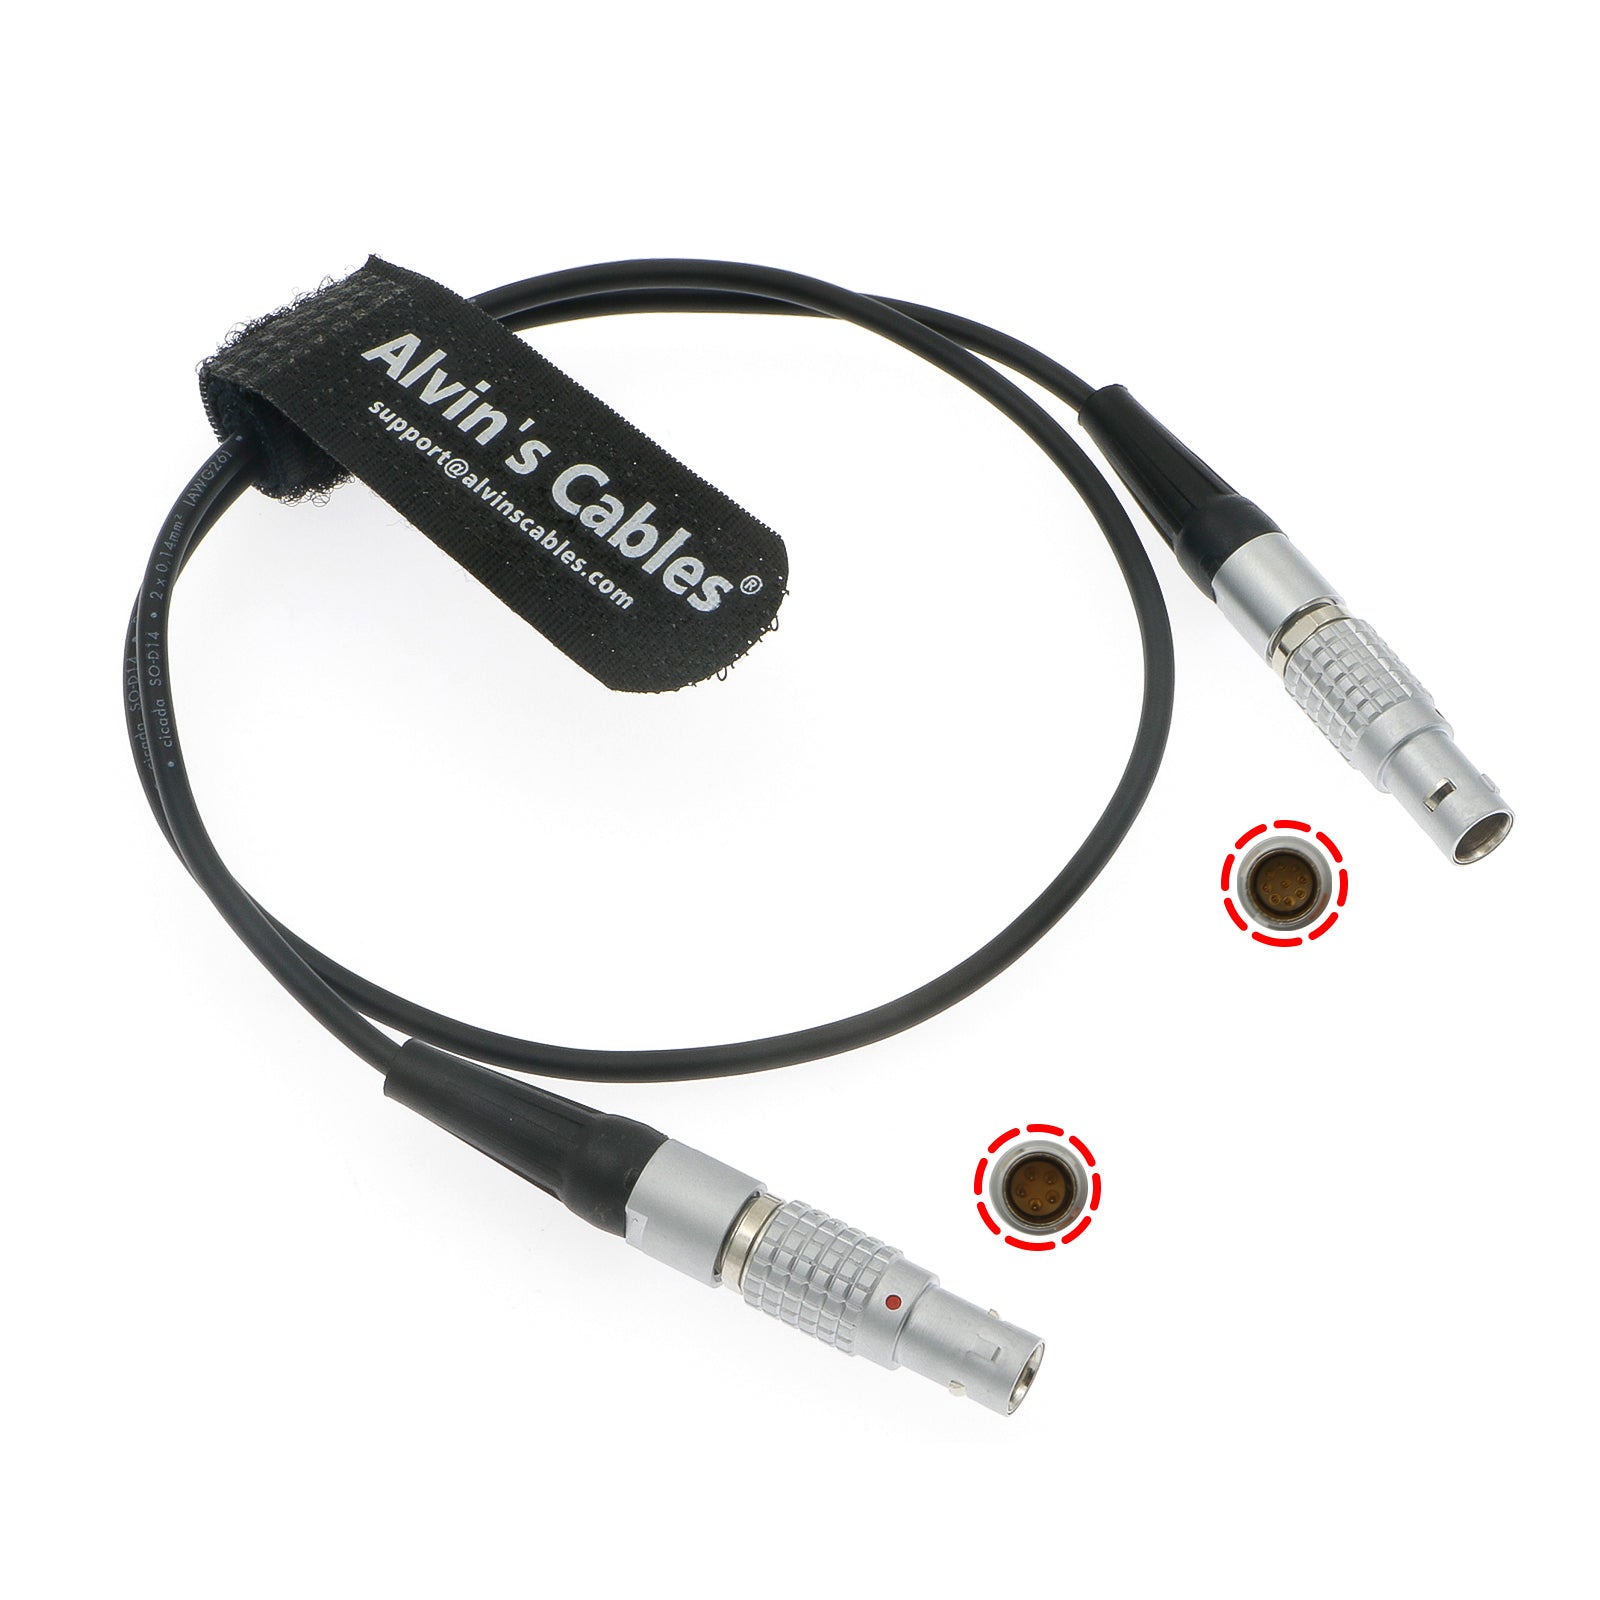 Alvin’s Cables RED-KOMODO Control-Cable for SMALLHD Focus PRO Monitor EXT 9 Pin to 5 Pin 55cm| 21.7inches